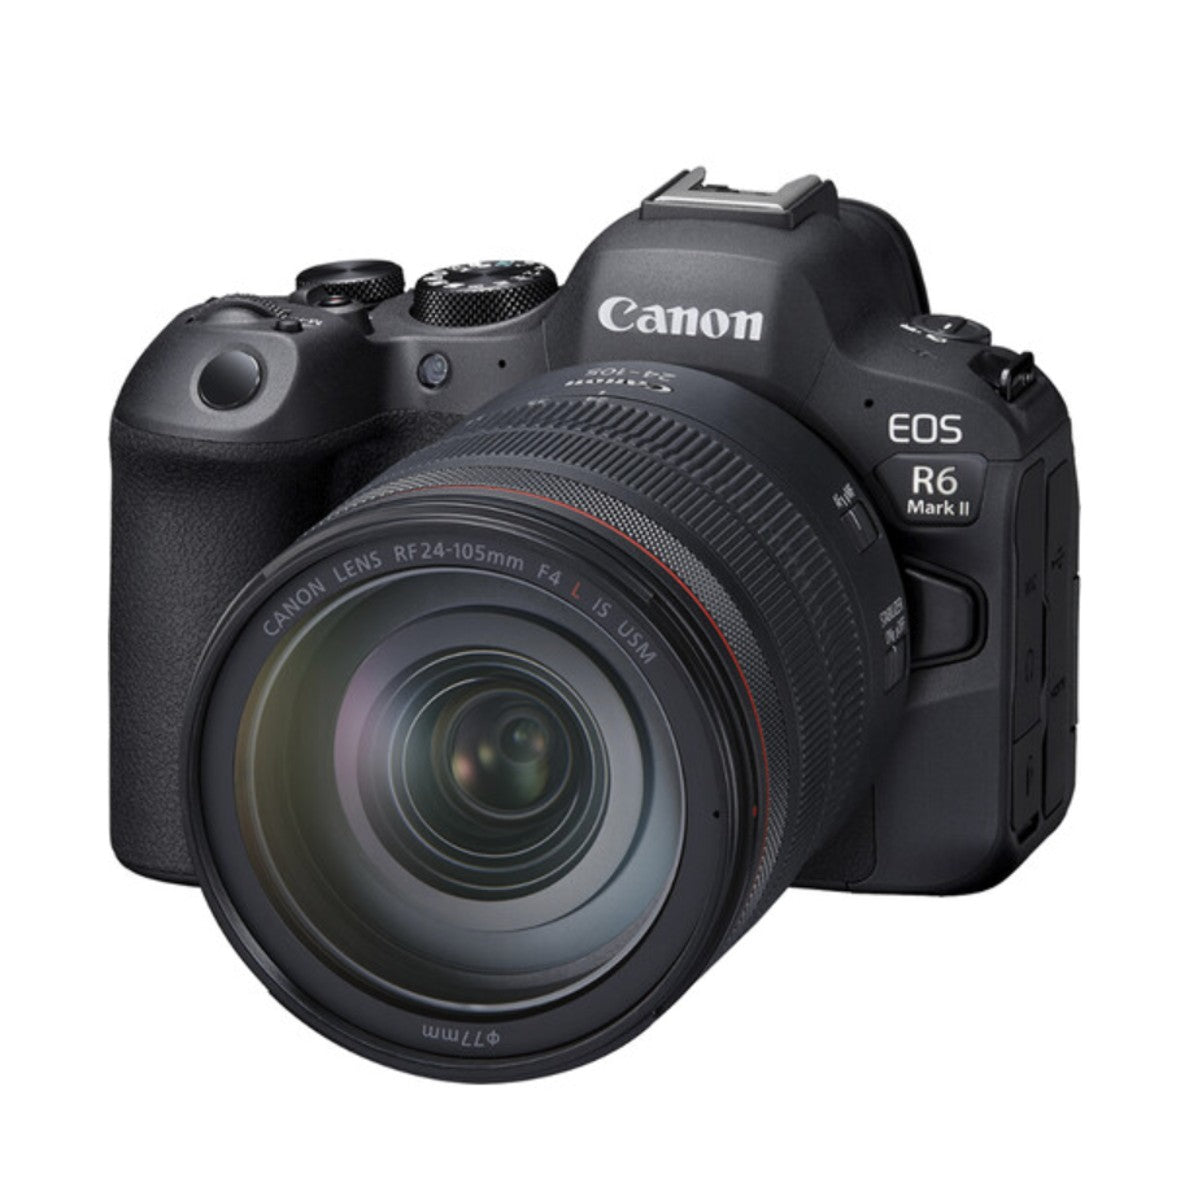 Canon EOS R6 Mark II Mirrorless Camera with RF 24-105mm f4L IS USM Lens